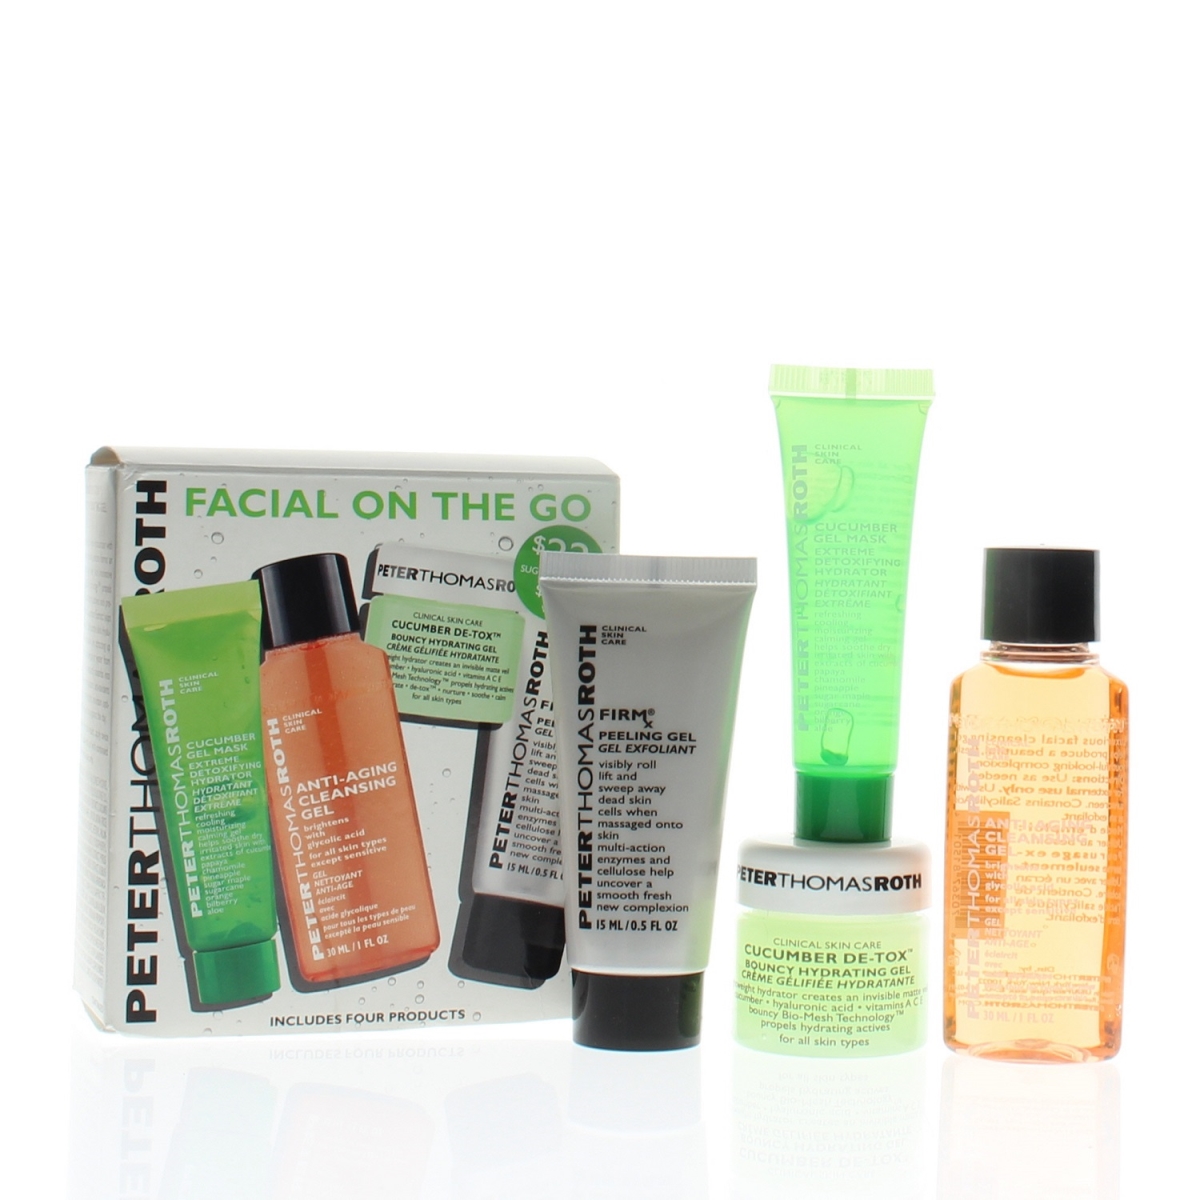 55064176 Facial On The Go Set -  Peter Thomas Roth